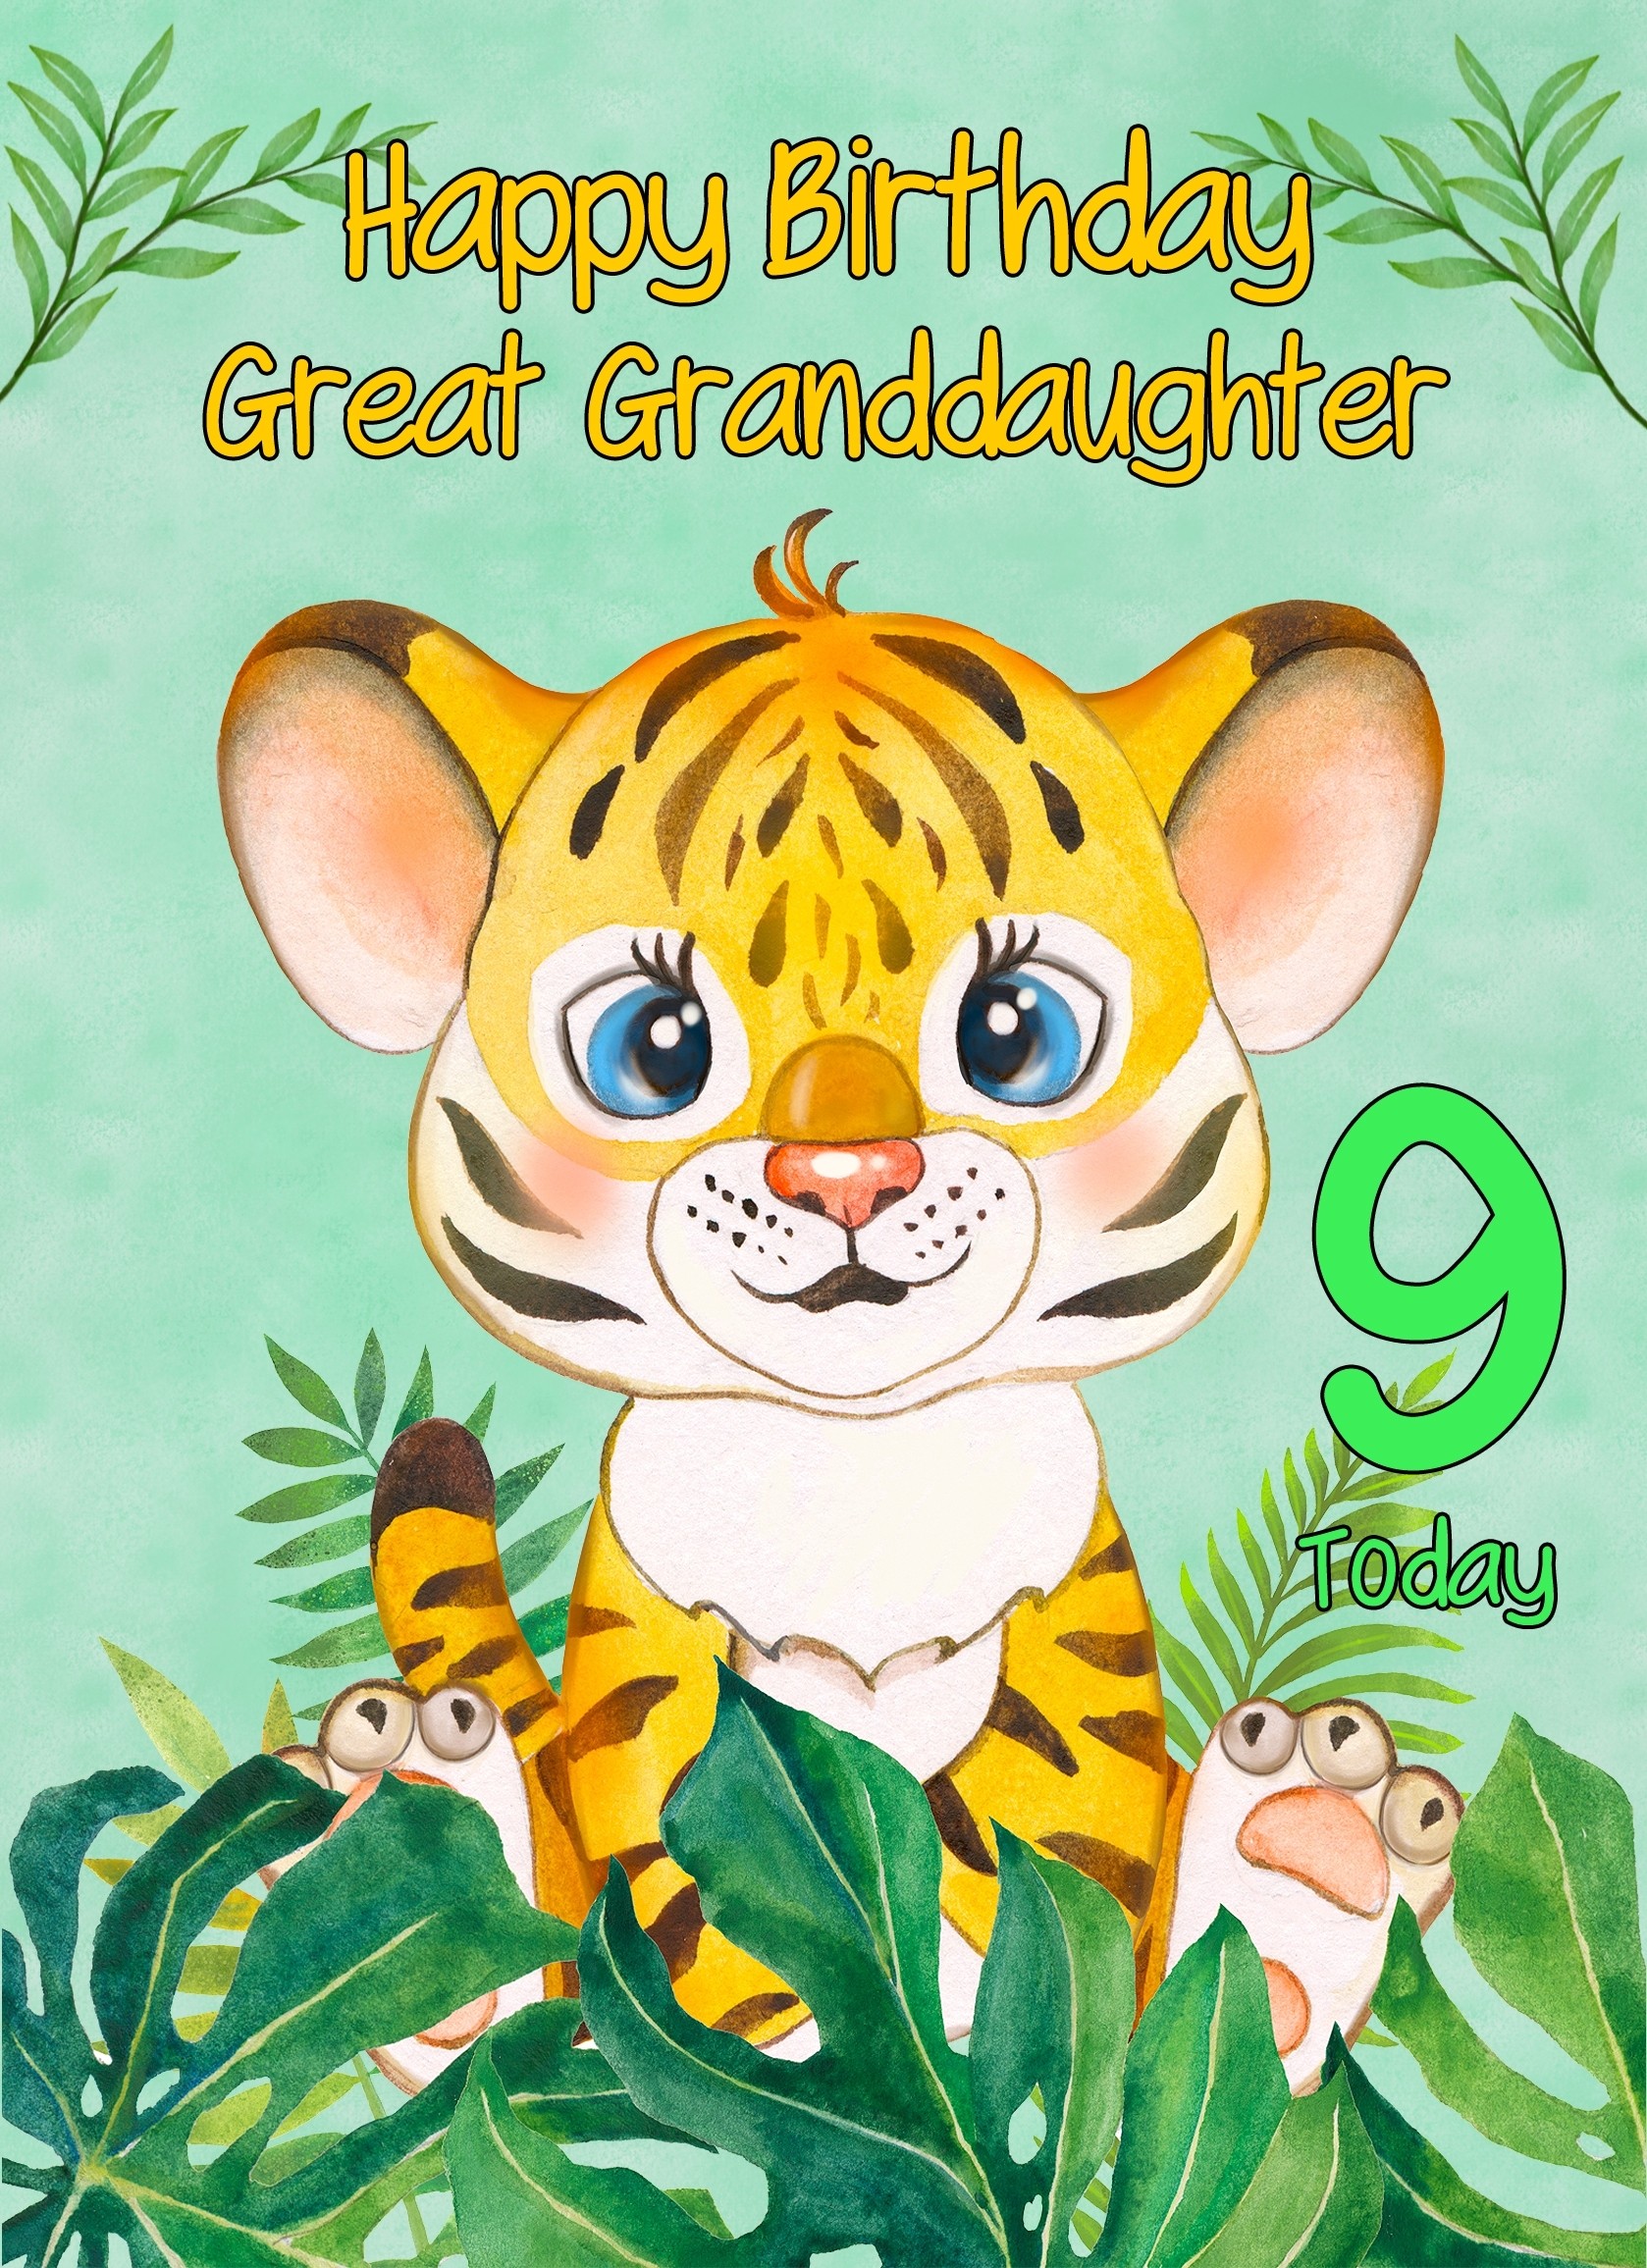 9th Birthday Card for Great Granddaughter (Tiger)